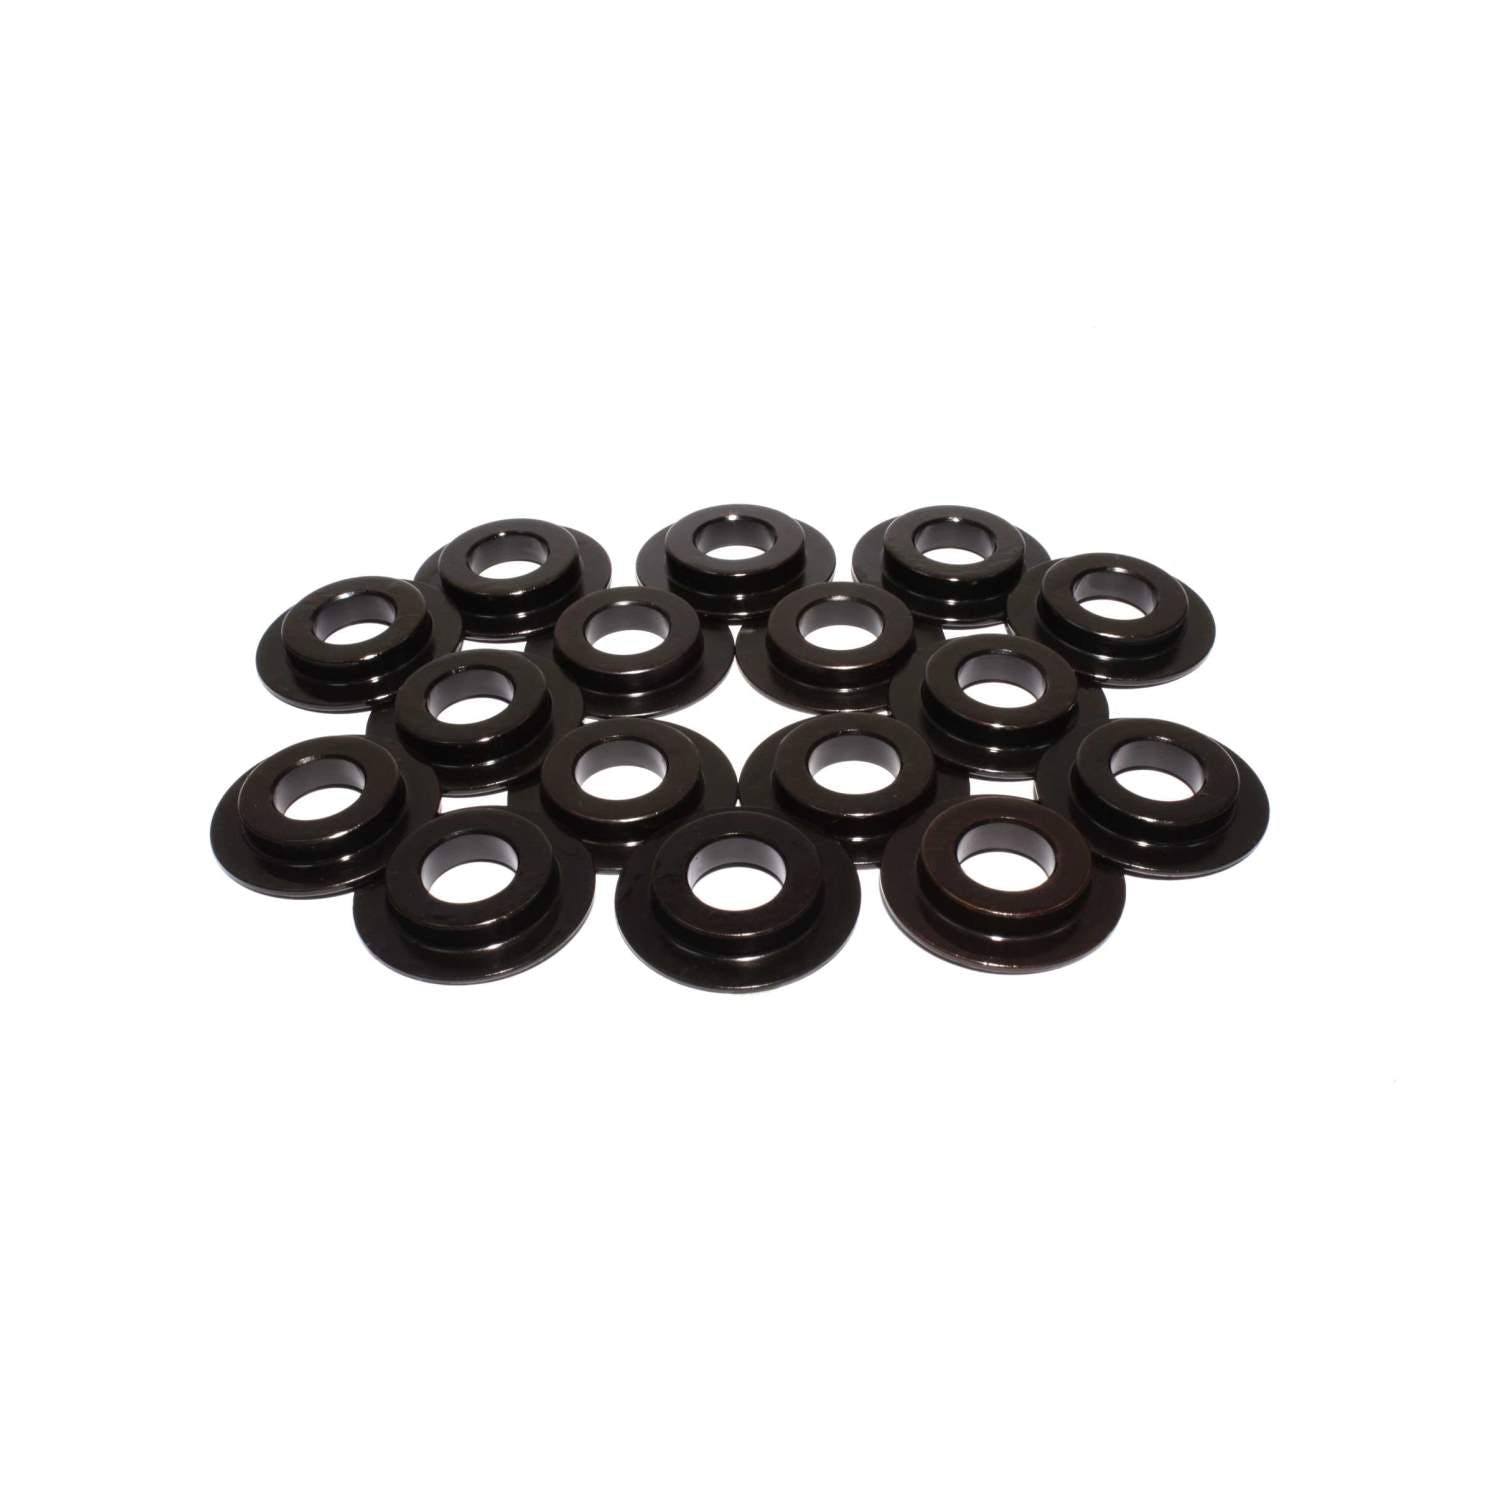 Competition Cams 4684-16 ID Spring Locator Set of 16 - 1.285 inch OD, .532 inch ID, .135 inch Thickness